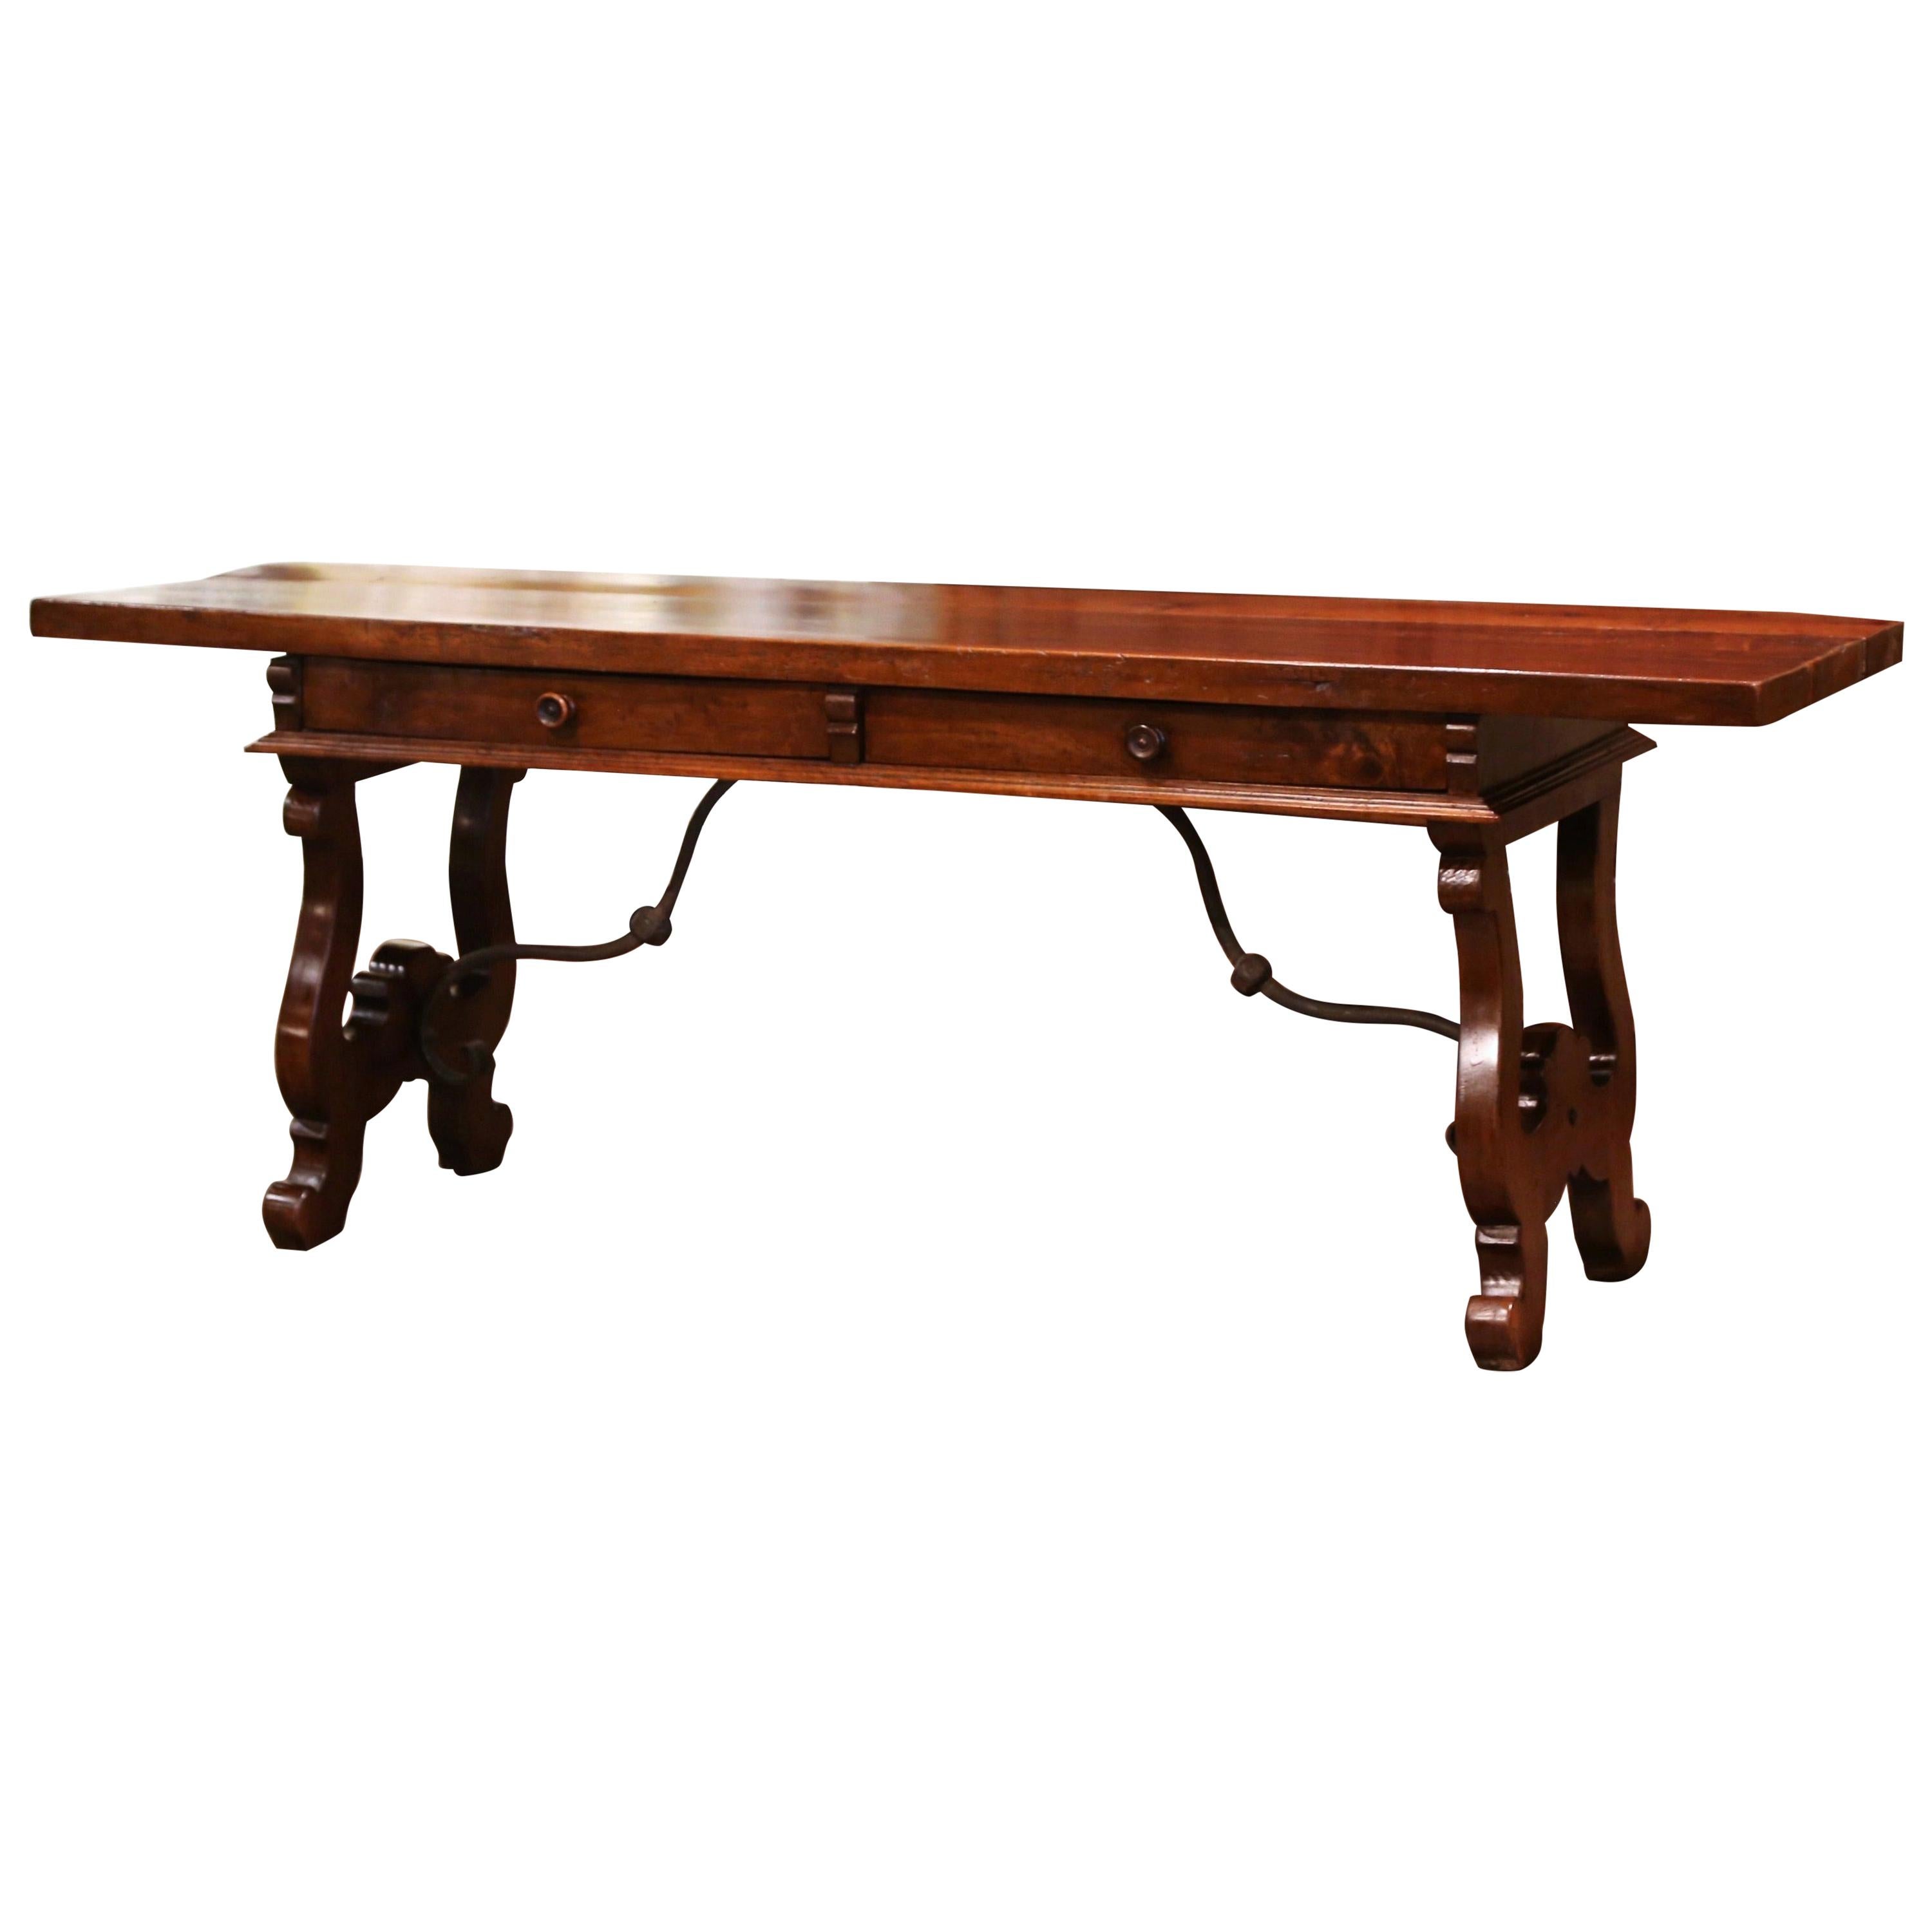 Mid-19th Century Spanish Carved Walnut and Iron Console Table Desk with Drawers